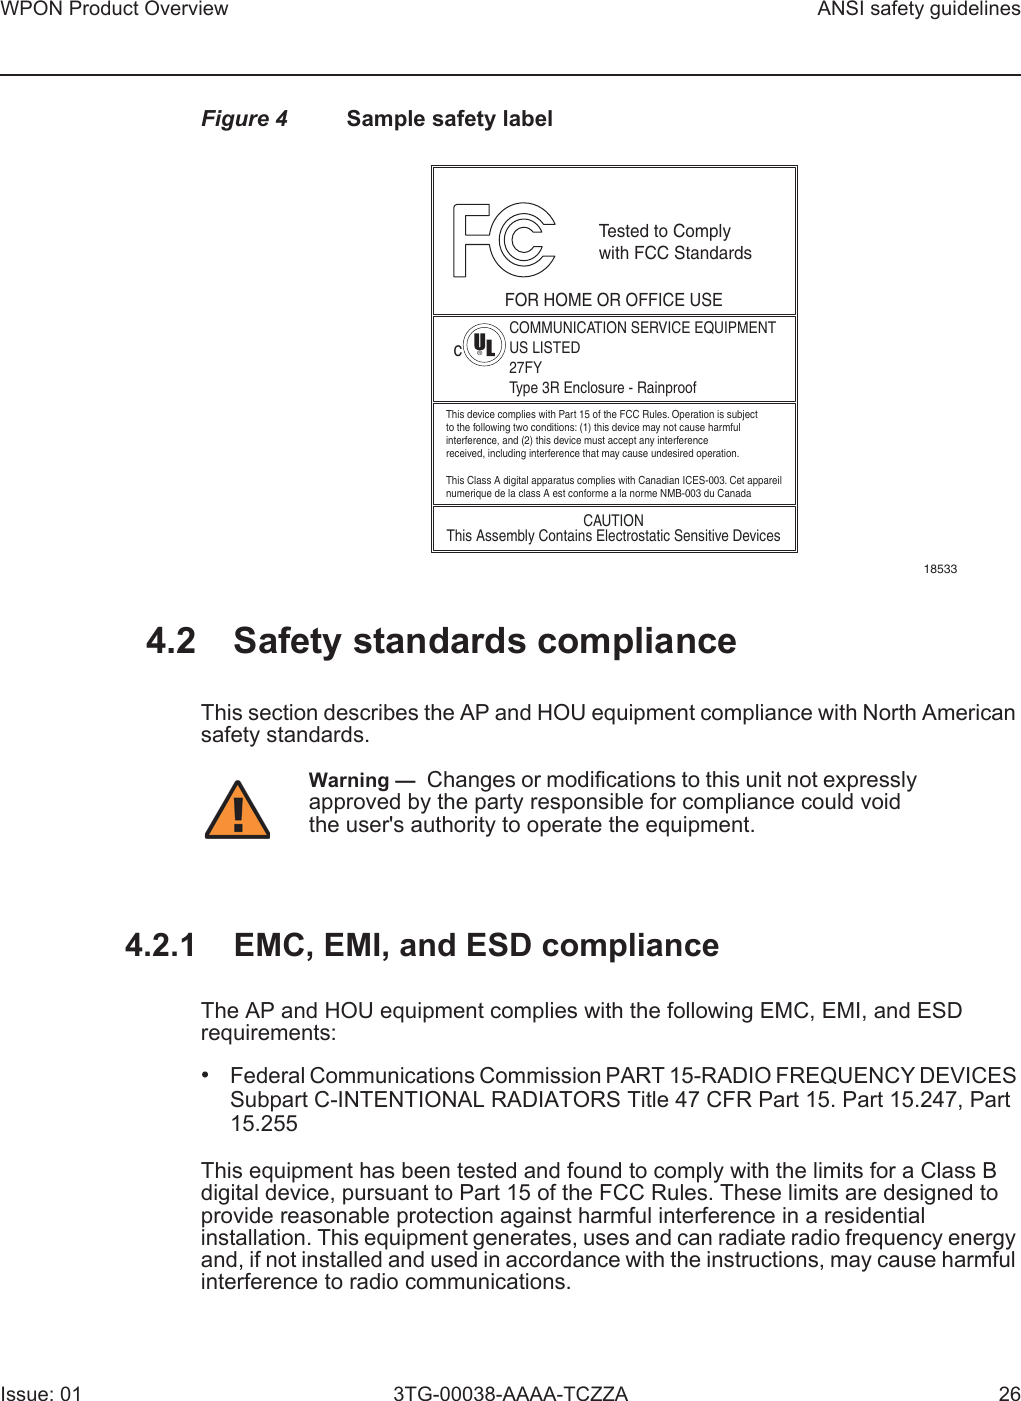 WPON Product Overview ANSI safety guidelinesIssue: 01 3TG-00038-AAAA-TCZZA 26Figure 4 Sample safety label4.2 Safety standards complianceThis section describes the AP and HOU equipment compliance with North American safety standards.4.2.1 EMC, EMI, and ESD complianceThe AP and HOU equipment complies with the following EMC, EMI, and ESD requirements: •Federal Communications Commission PART 15-RADIO FREQUENCY DEVICES Subpart C-INTENTIONAL RADIATORS Title 47 CFR Part 15. Part 15.247, Part15.255This equipment has been tested and found to comply with the limits for a Class B digital device, pursuant to Part 15 of the FCC Rules. These limits are designed to provide reasonable protection against harmful interference in a residential installation. This equipment generates, uses and can radiate radio frequency energy and, if not installed and used in accordance with the instructions, may cause harmful interference to radio communications.18533This device complies with Part 15 of the FCC Rules. Operation is subjectto the following two conditions: (1) this device may not cause harmfulinterference, and (2) this device must accept any interferencereceived, including interference that may cause undesired operation.This Class A digital apparatus complies with Canadian ICES-003. Cet appareilnumerique de la class A est conforme a la norme NMB-003 du CanadaTested to Complywith FCC StandardsFOR HOME OR OFFICE USECOMMUNICATION SERVICE EQUIPMENTUS LISTED27FYType 3R Enclosure - RainproofCAUTIONThis Assembly Contains Electrostatic Sensitive Devicesc®Warning —  Changes or modifications to this unit not expressly approved by the party responsible for compliance could void the user&apos;s authority to operate the equipment.